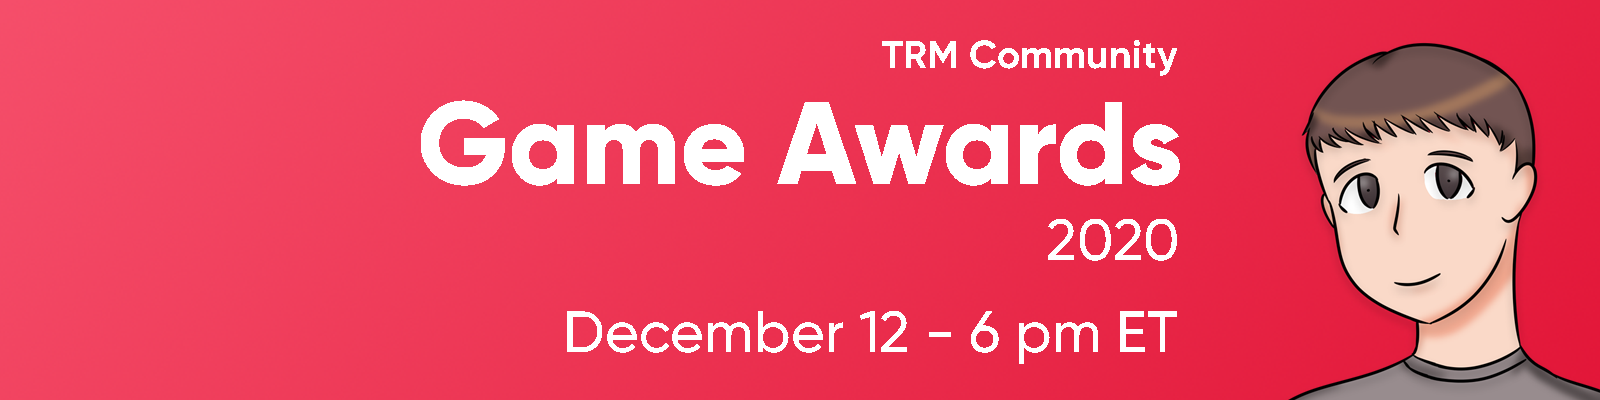 TRM Community Game Awards 2020 Results - TheRandomMelon